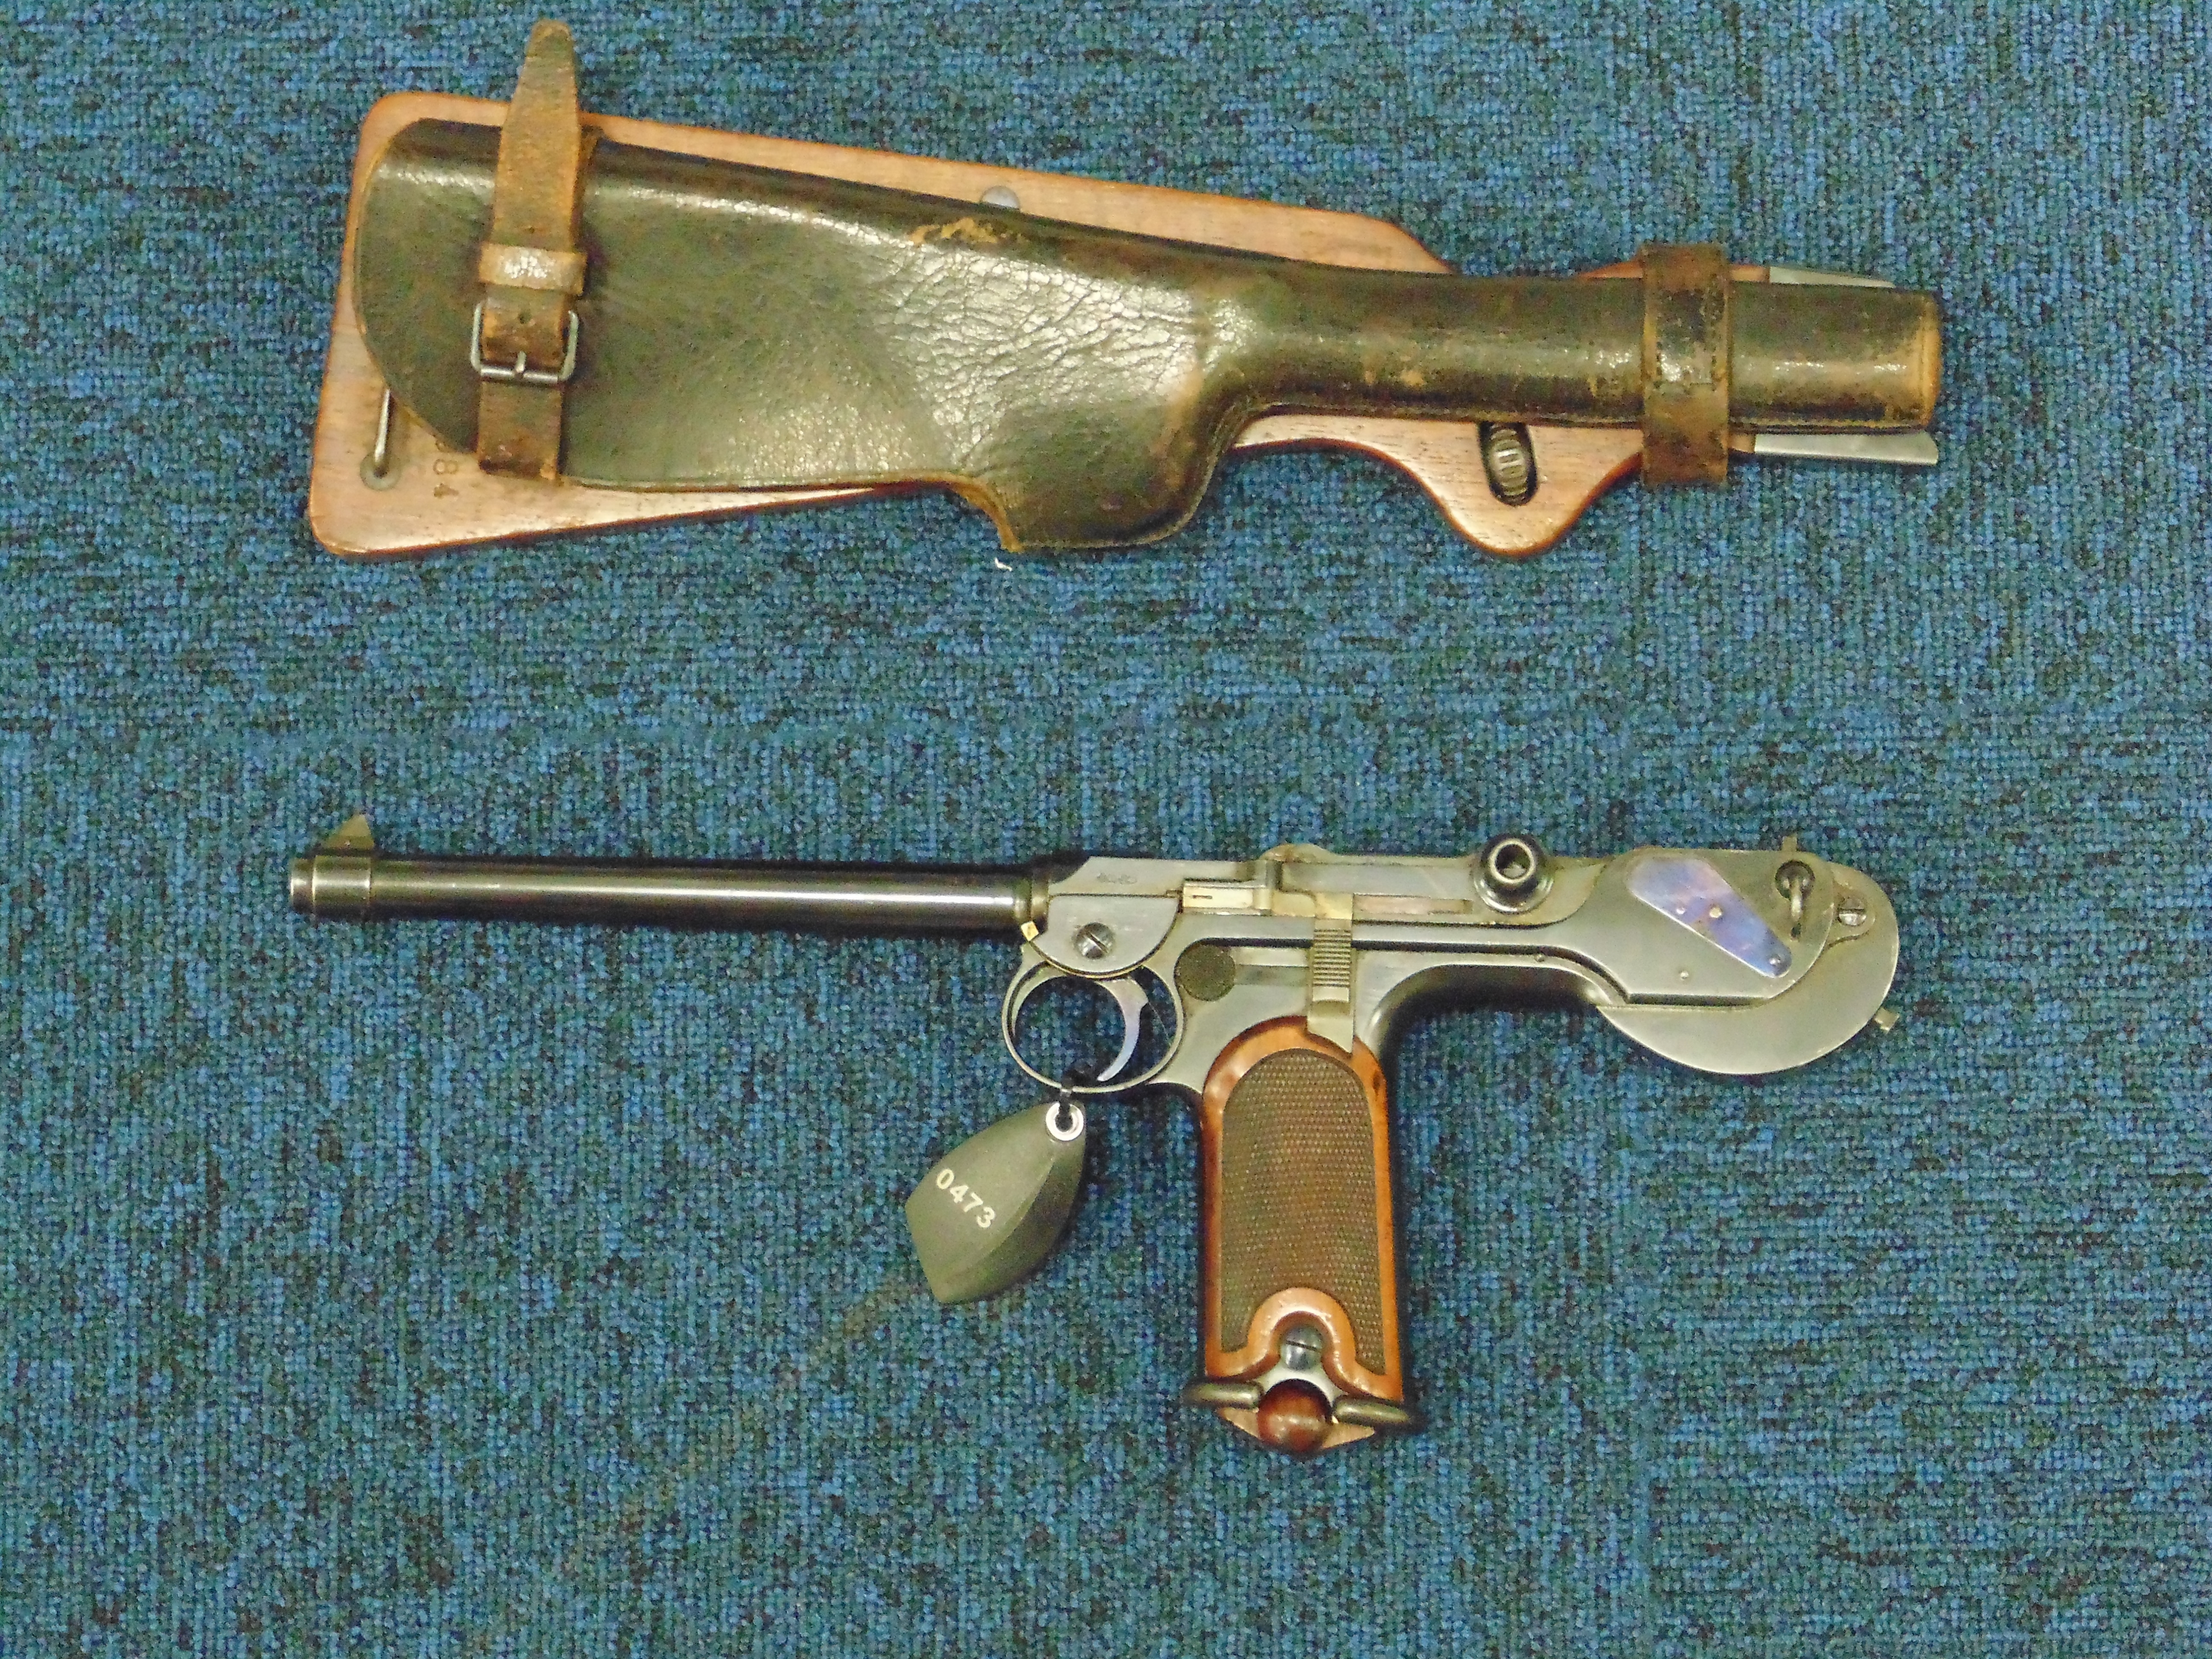 The Borchardt C93 was the Luger's immediate ancestor, and the first practical automatic pistol, preceding the Mauser C96 by several years